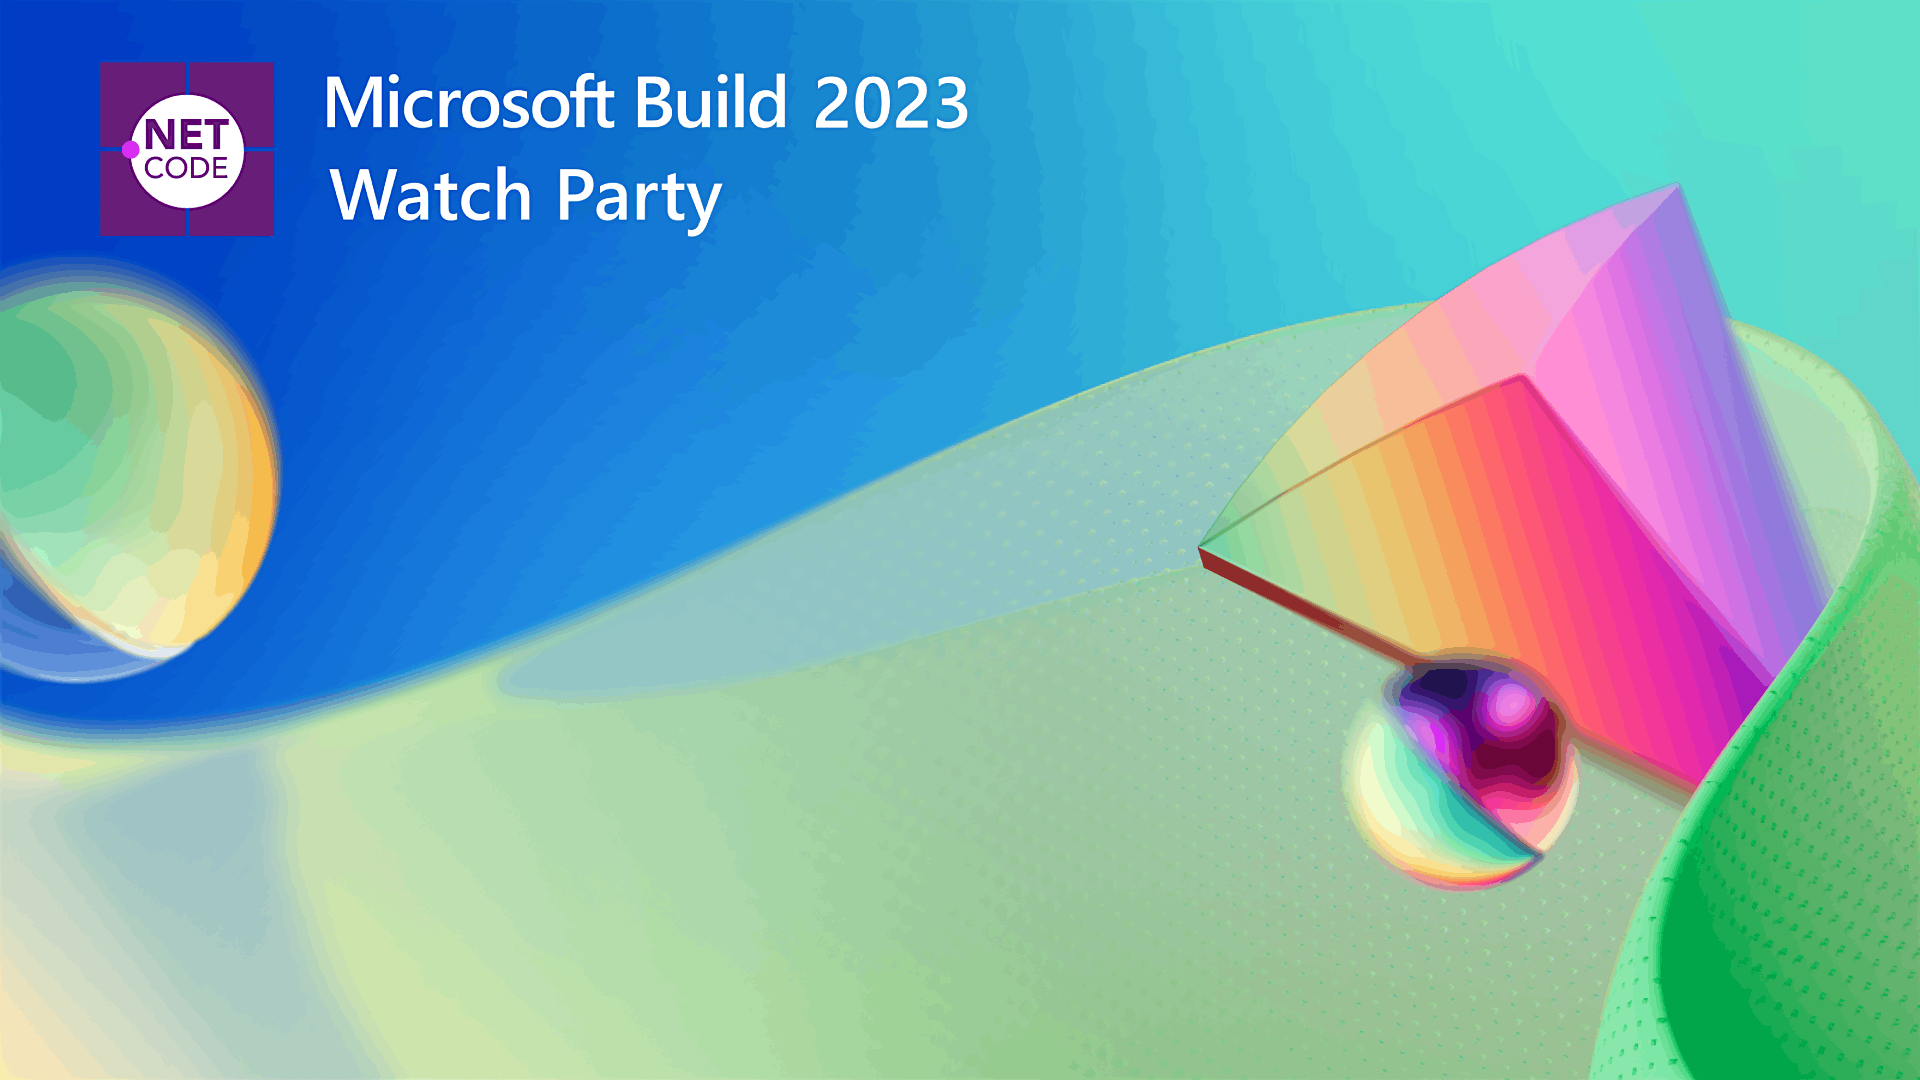 Microsoft Build 2023 Watch Party